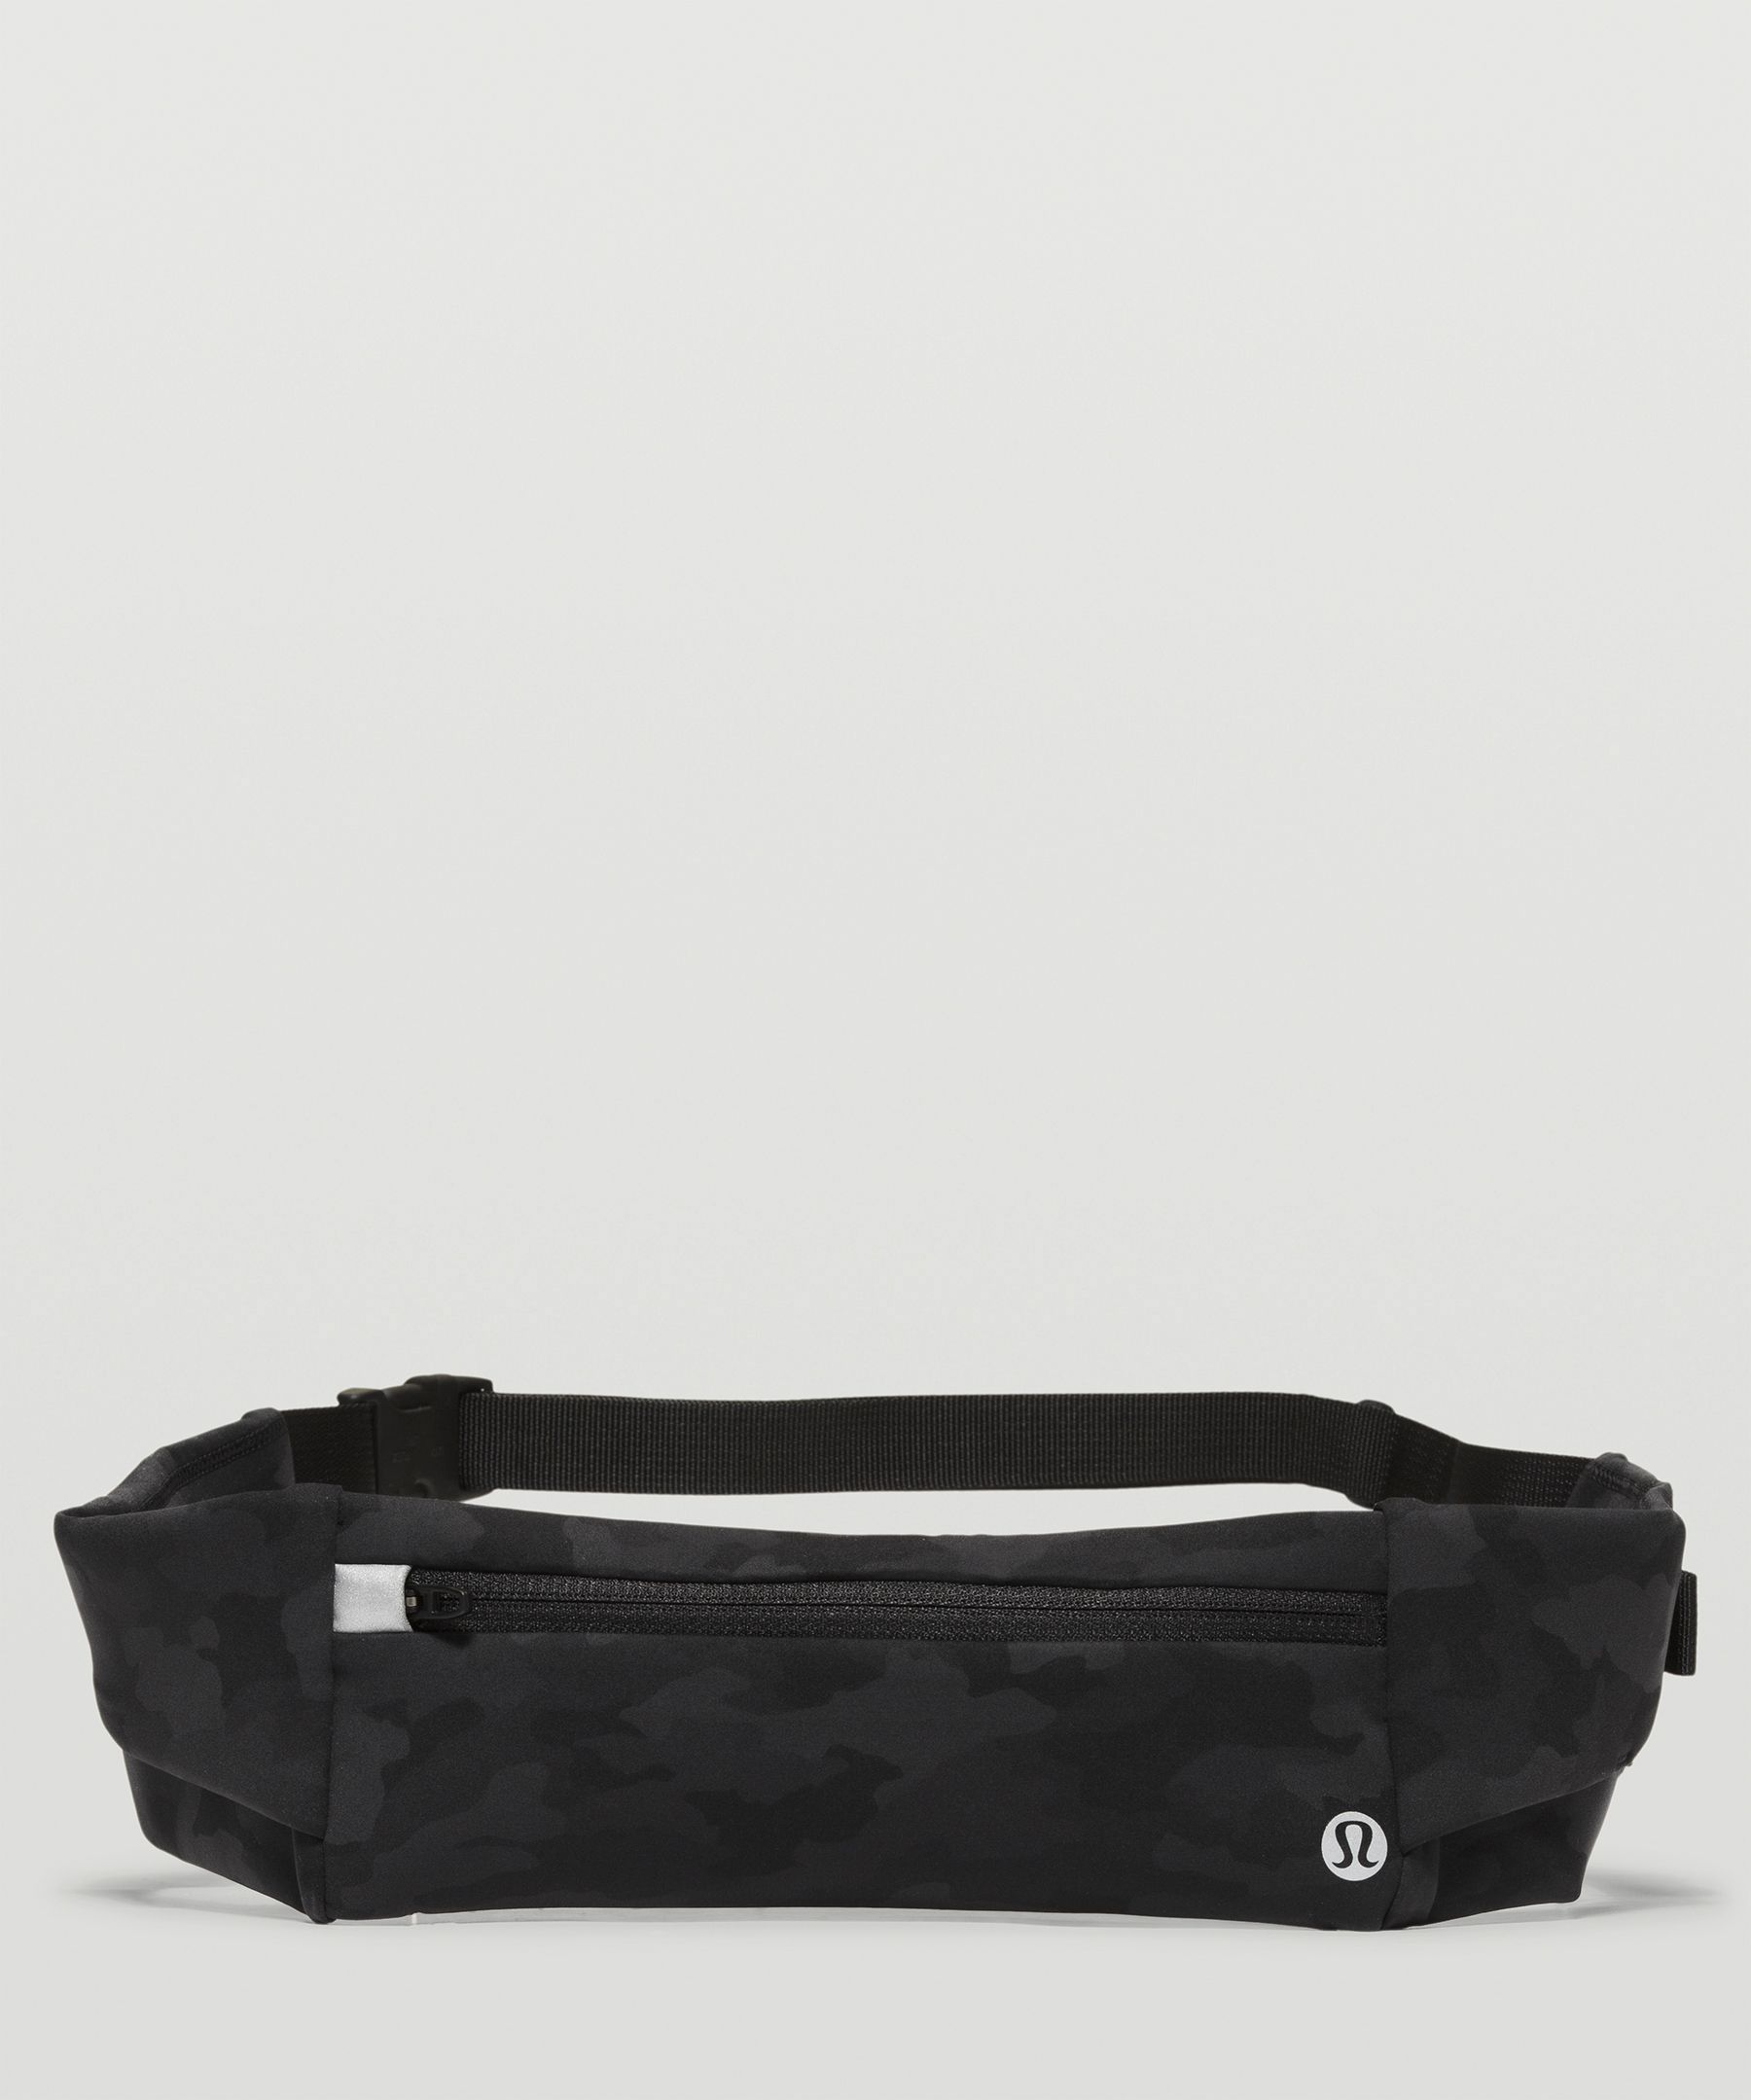 Lululemon athletica Fast and Free Running Belt, Unisex Bags,Purses,Wallets